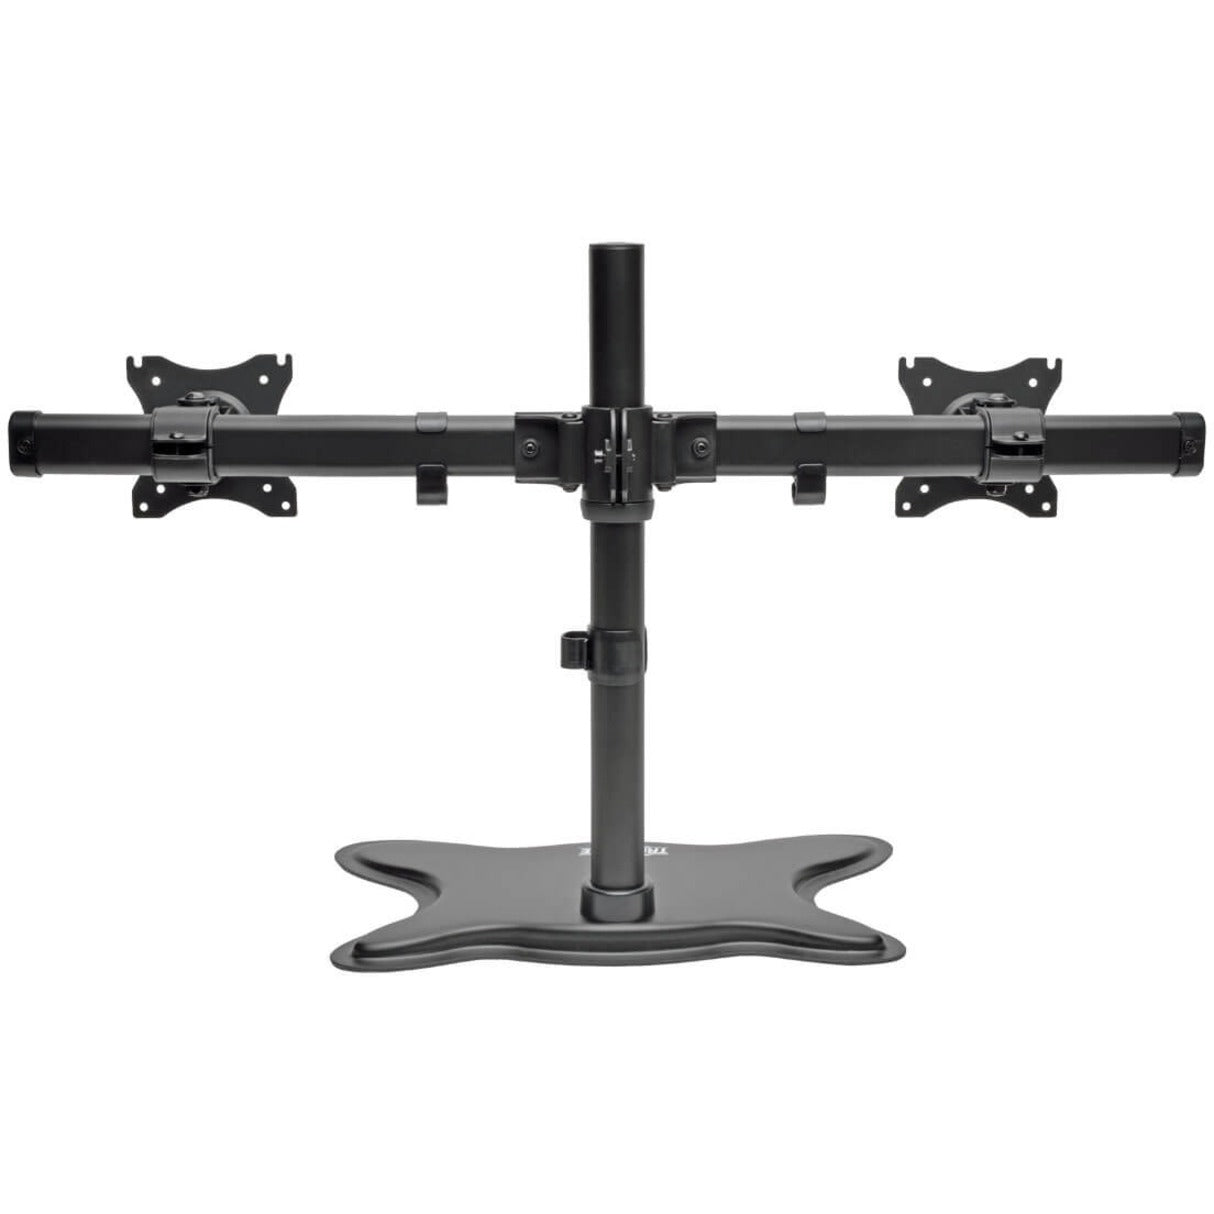 Tripp Lite DDR1327SDD Dual-Monitor Desktop Mount Stand for 13" to 27" Flat-Screen Displays, Comfortable, Adjustable Arm, Cable Management, Black